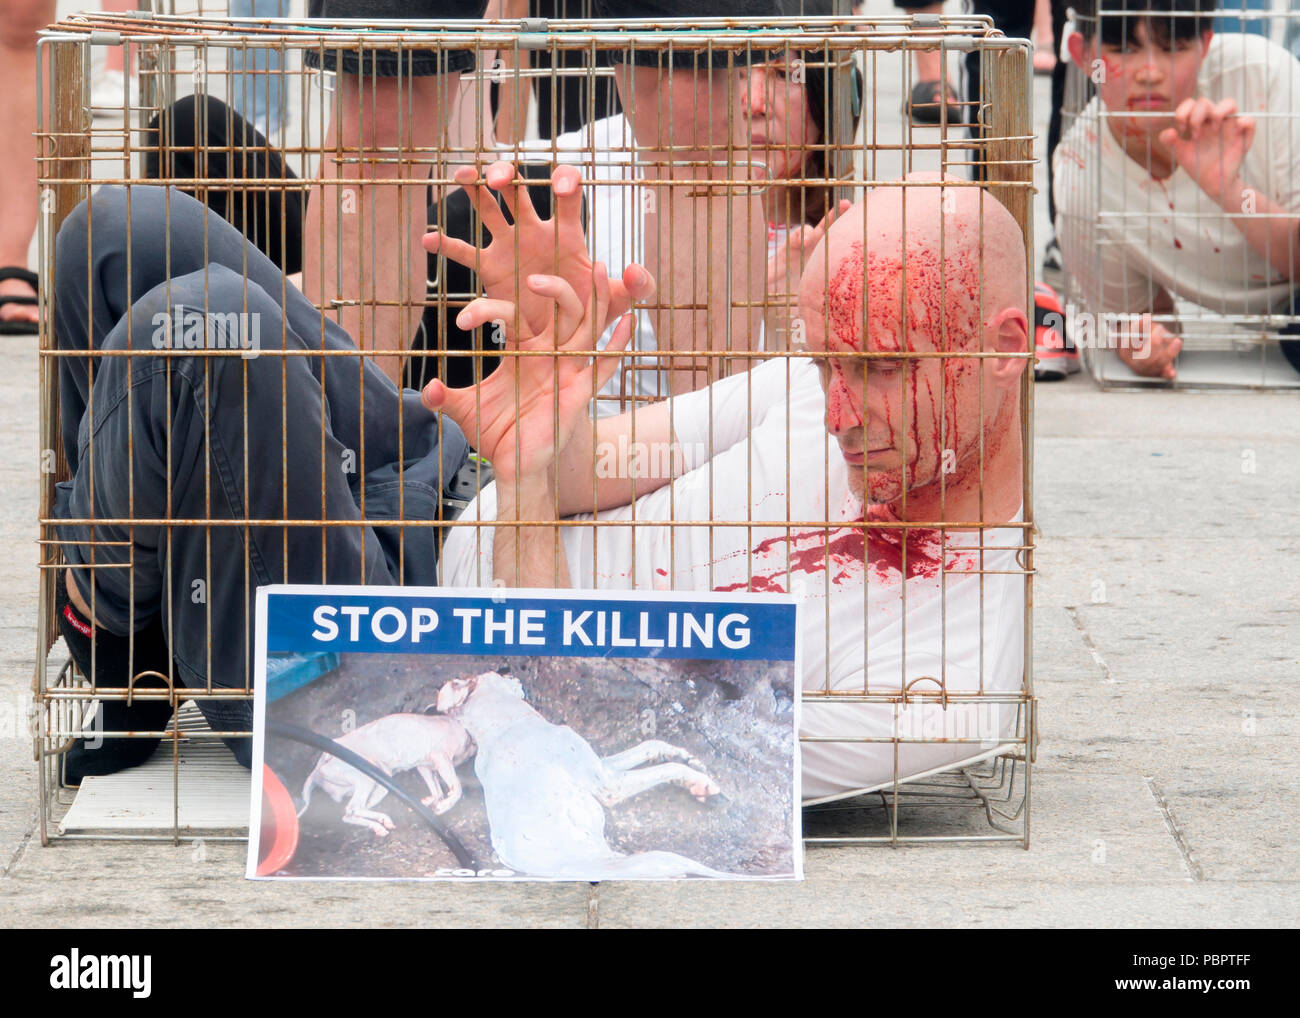 Animal advocacy campaign, July 28, 2018 : Members of an animal advocacy group perform during a campaign against dog meat in Seoul, South Korea. Dogs had been slaughtered for meat as a summertime delicacy like ginseng chicken soup typically during the Bok Nal summer season in Korea. The practice has faded markedly in recent decades amid strong objection to killing dogs for meat but animal protection groups claim thousands of dogs are slaughtered every day, local media reported. Credit: Lee Jae-Won/AFLO/Alamy Live News Stock Photo